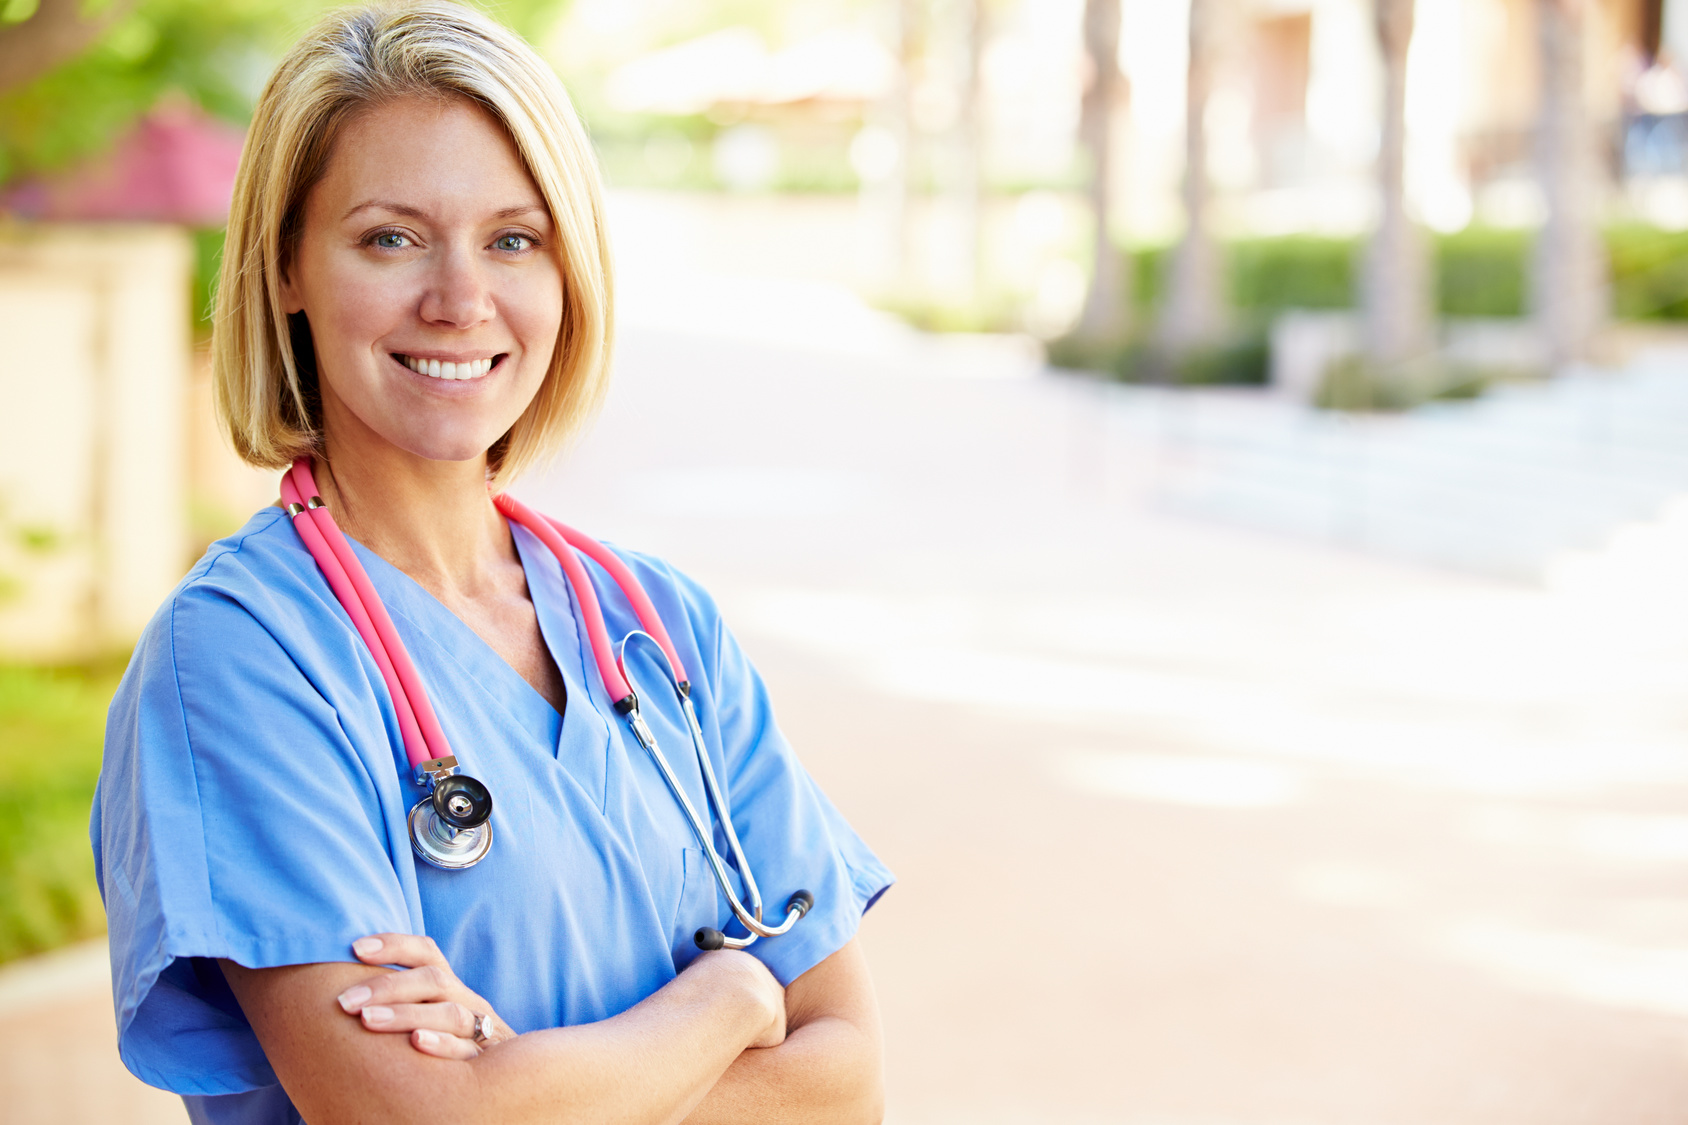 Non-Hospital Jobs to Diversify Your Nursing Career